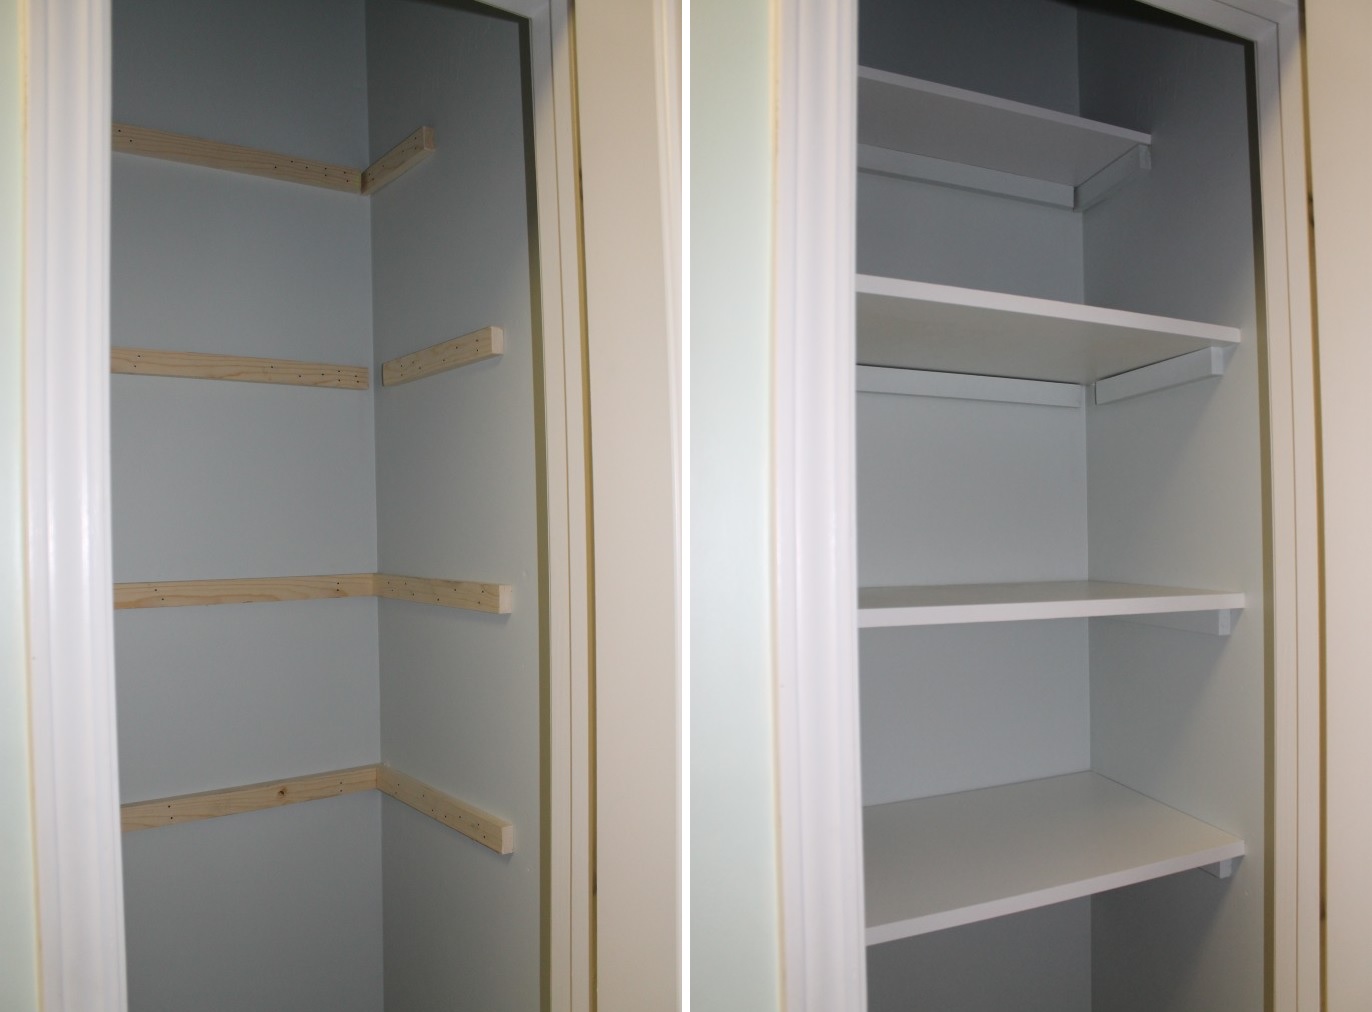 Painted white wooden shelves for closet